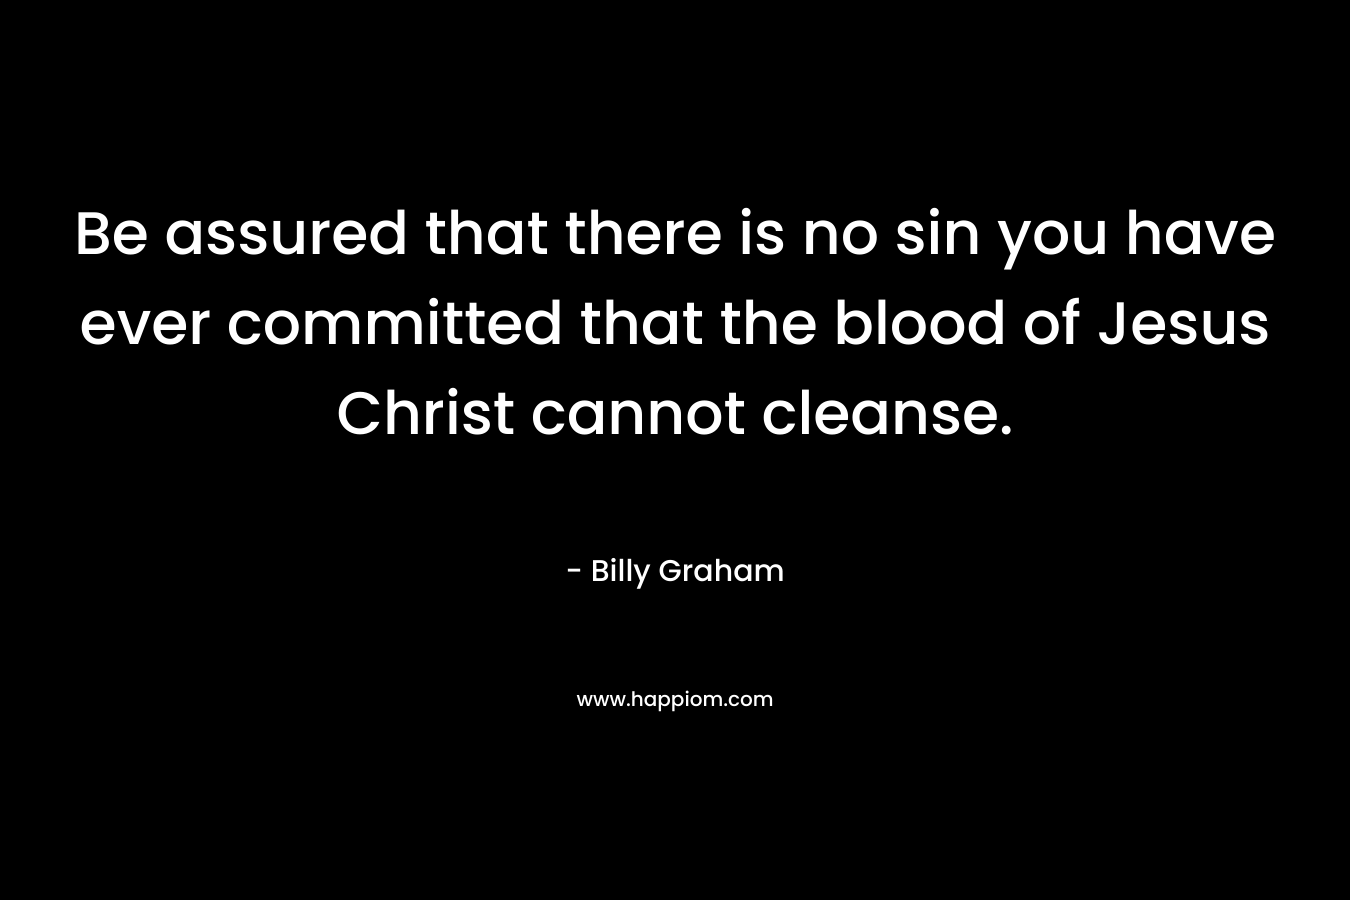 Be assured that there is no sin you have ever committed that the blood of Jesus Christ cannot cleanse.